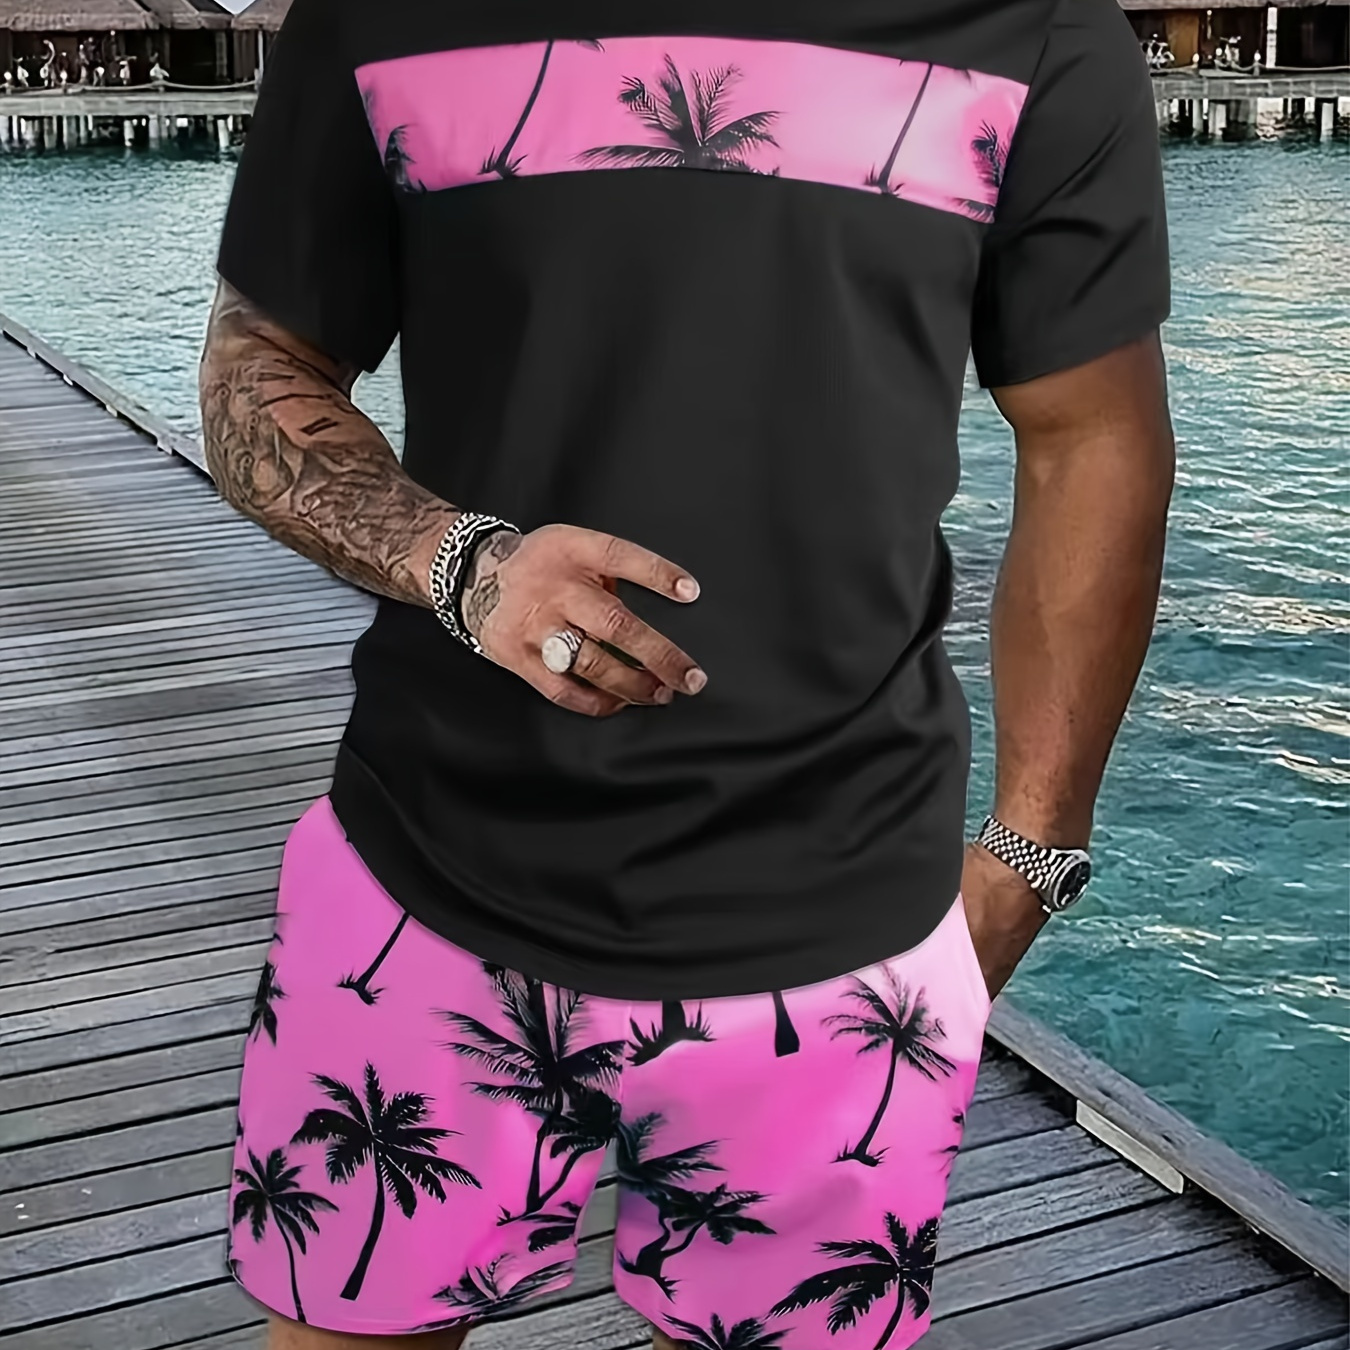 

Fashionable Design Men's 2pcs Casual Co Ord Set Of Coconut Tree Pattern Outfits, Crew Neck Short Sleeve T-shirt And Shorts, Lightweight And Comfy For Summer Holiday Leisurewear